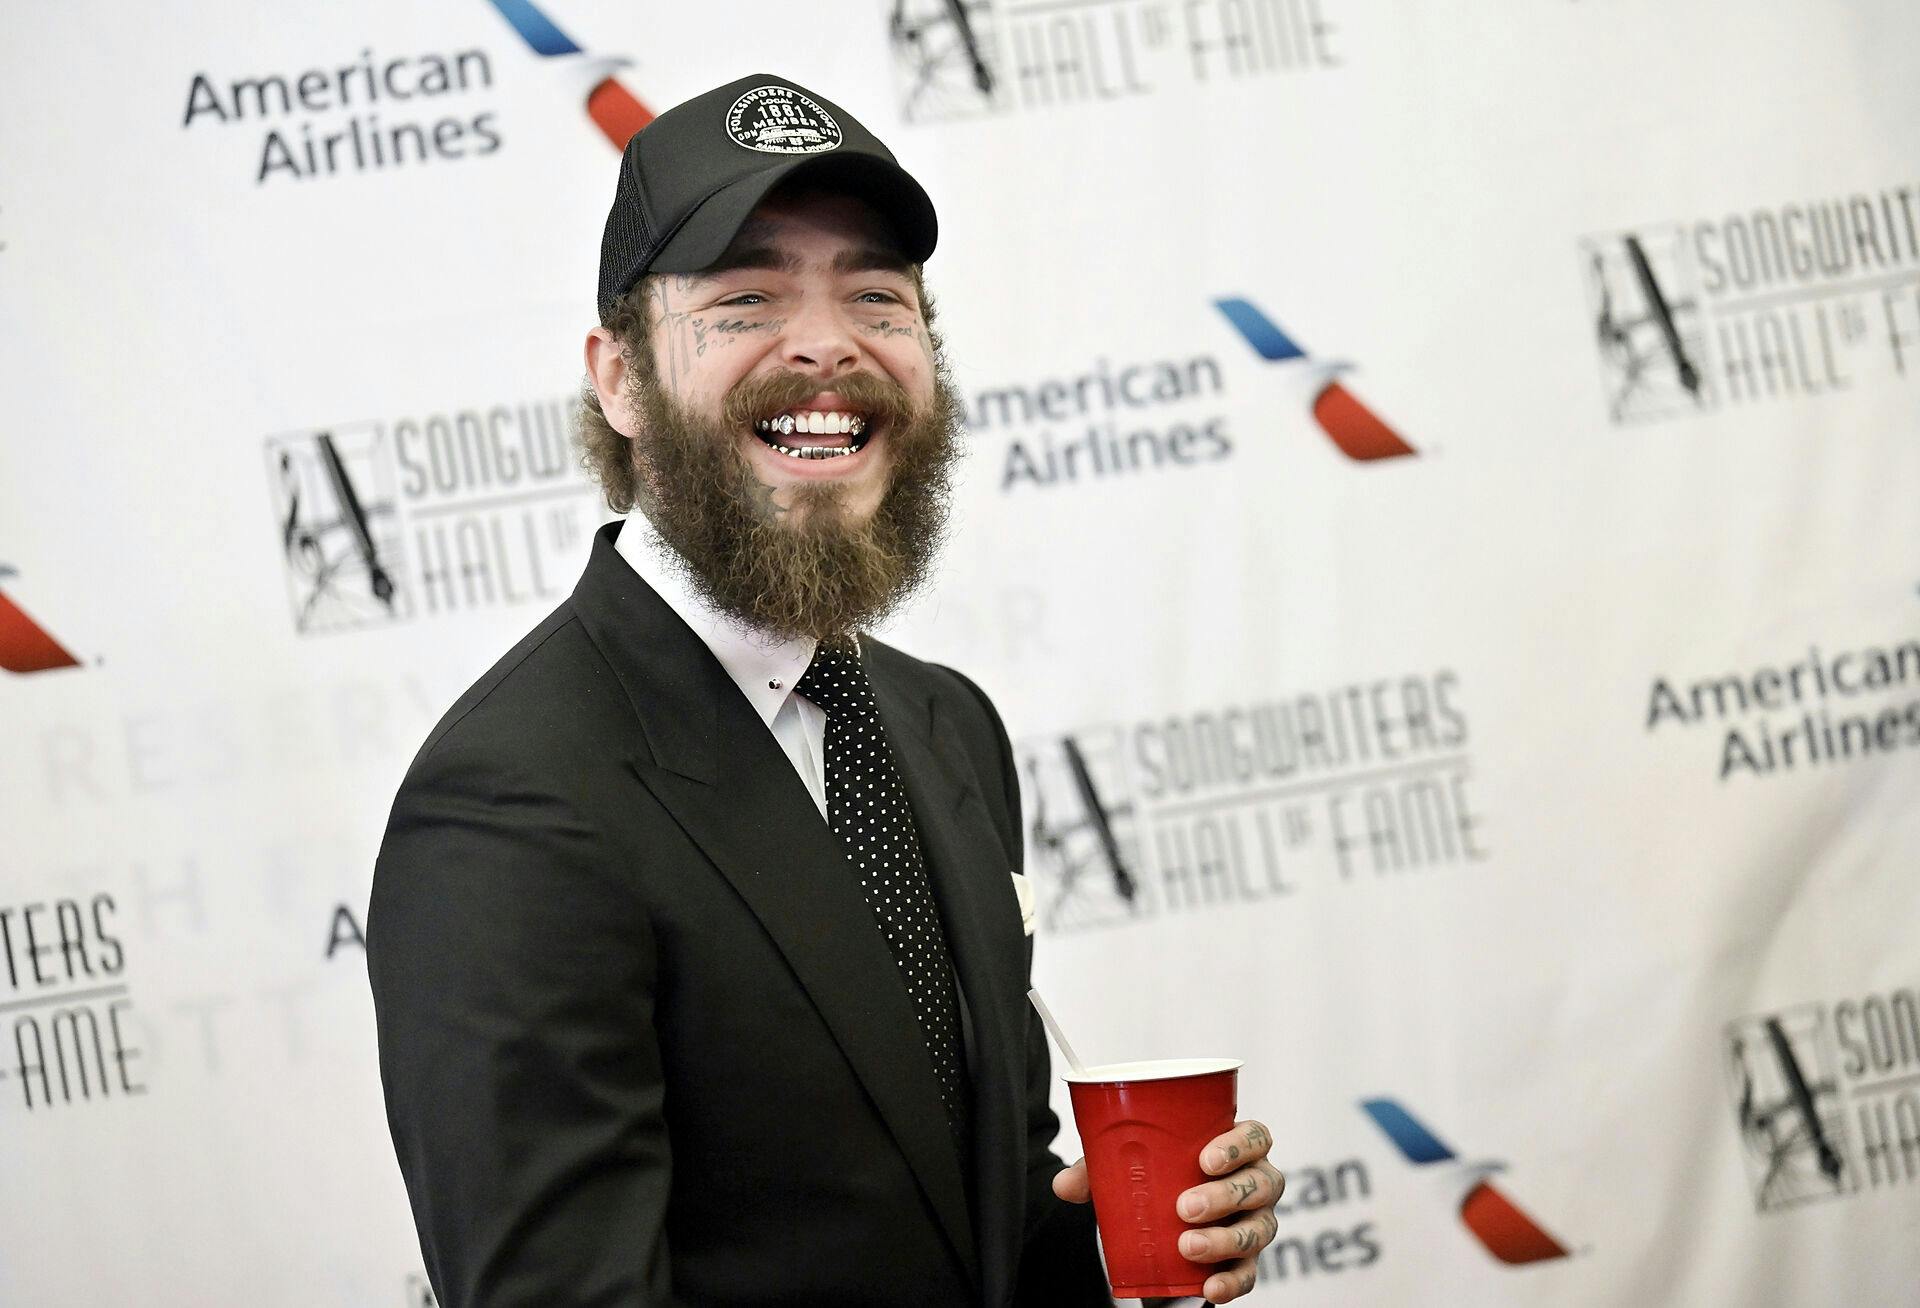 Post Malone attends the 52nd annual Songwriters Hall of Fame induction and awards ceremony at the New York Marriott Marquis Hotel on Thursday, June 15, 2023, in New York. (Photo by Evan Agostini/Invision/AP)